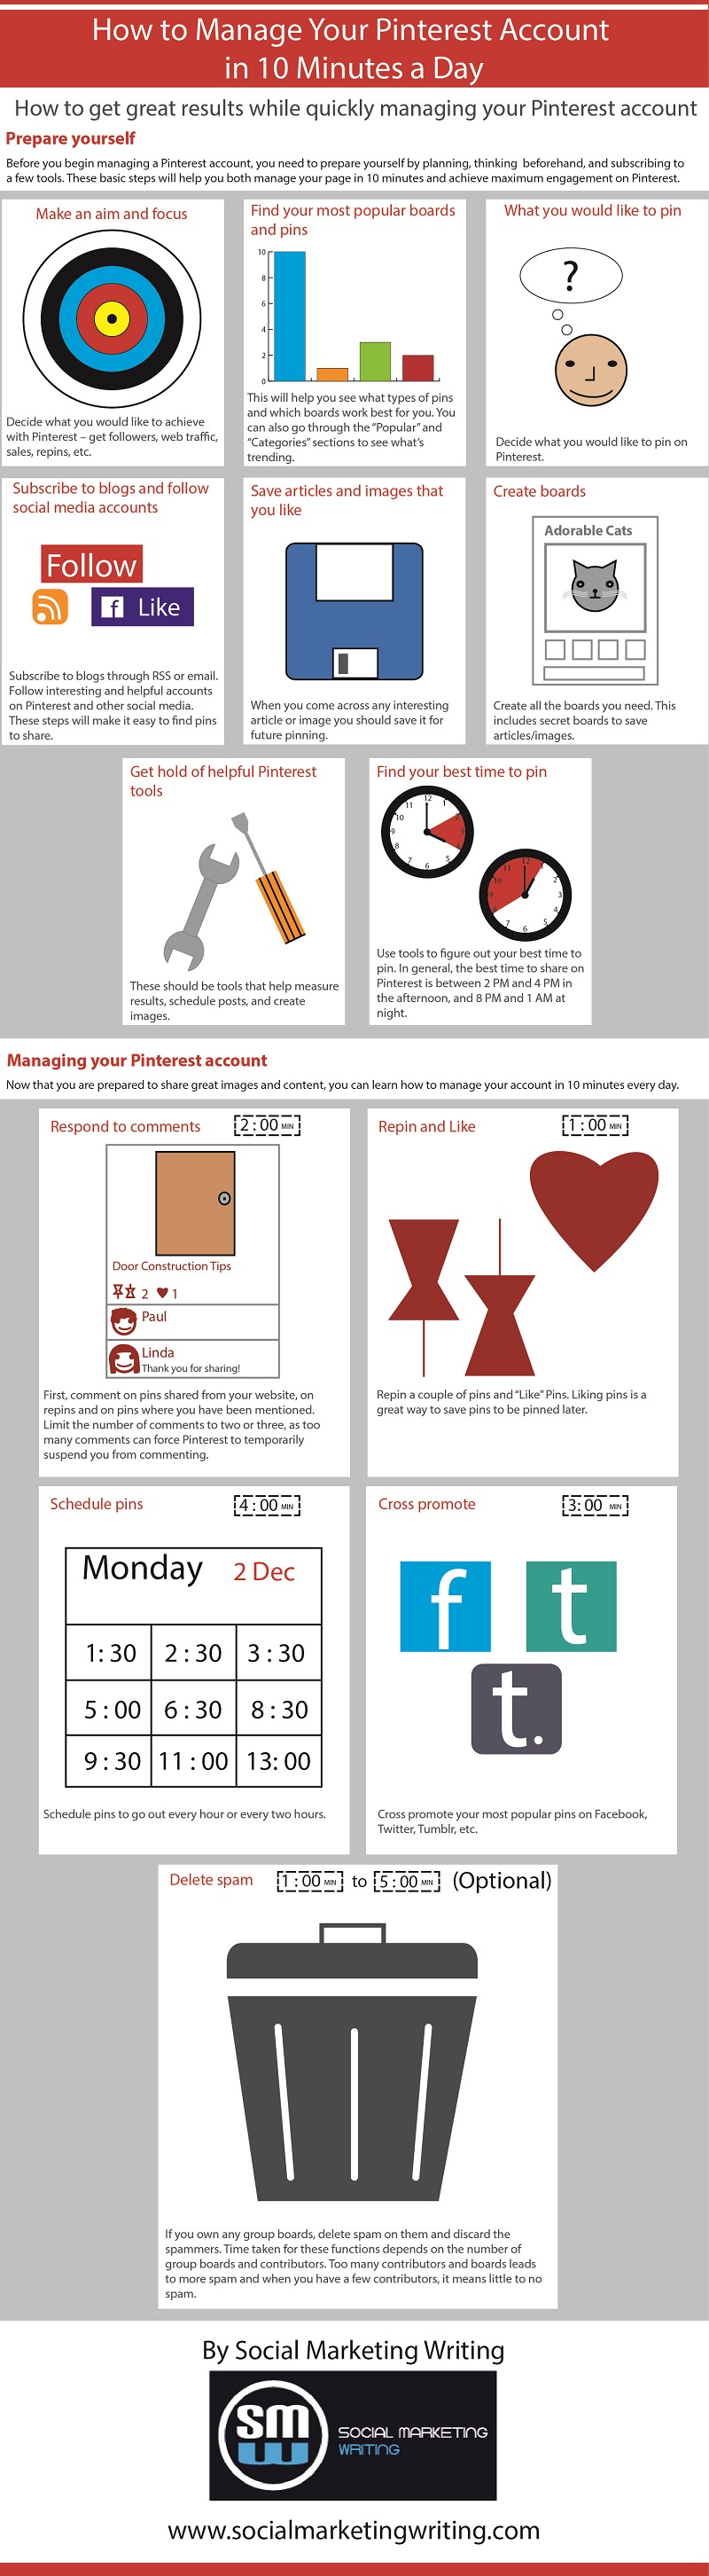 How to Manage Your Pinterest Account in 10 Minutes a Day